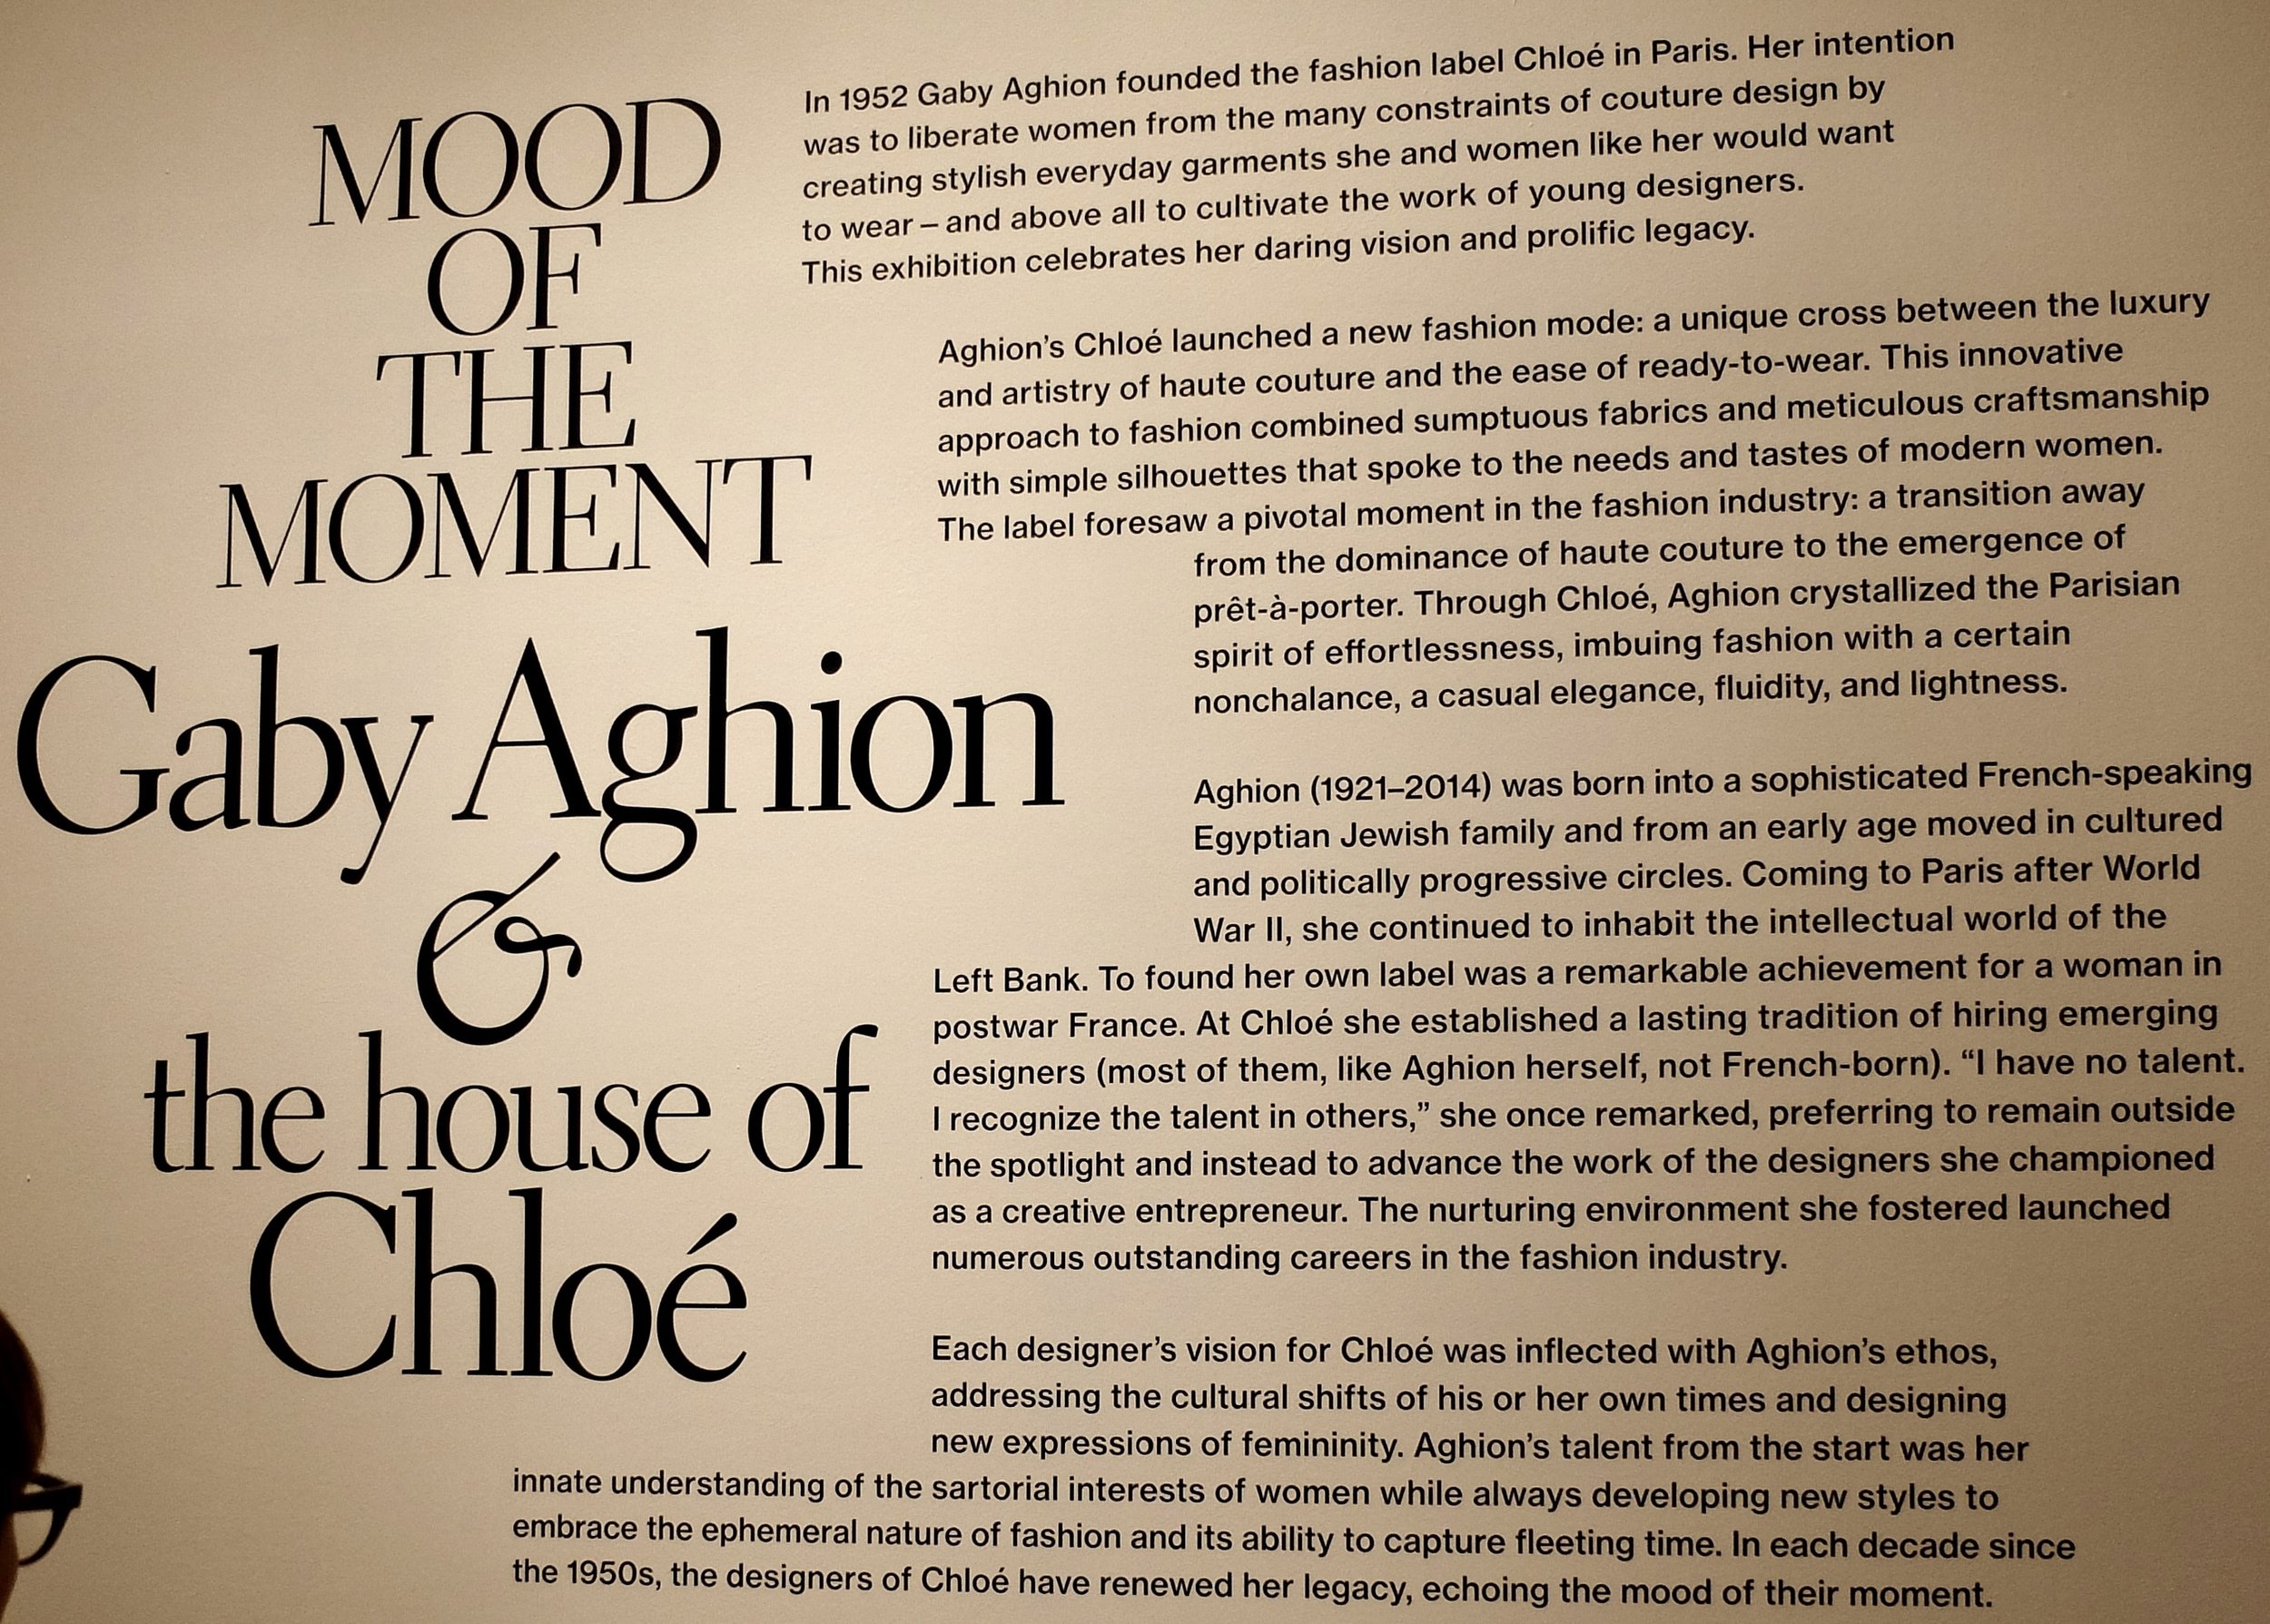  The Jewish Museum -  Mood of the Moment - Gaby Aghion &amp; the House of Chloé.  